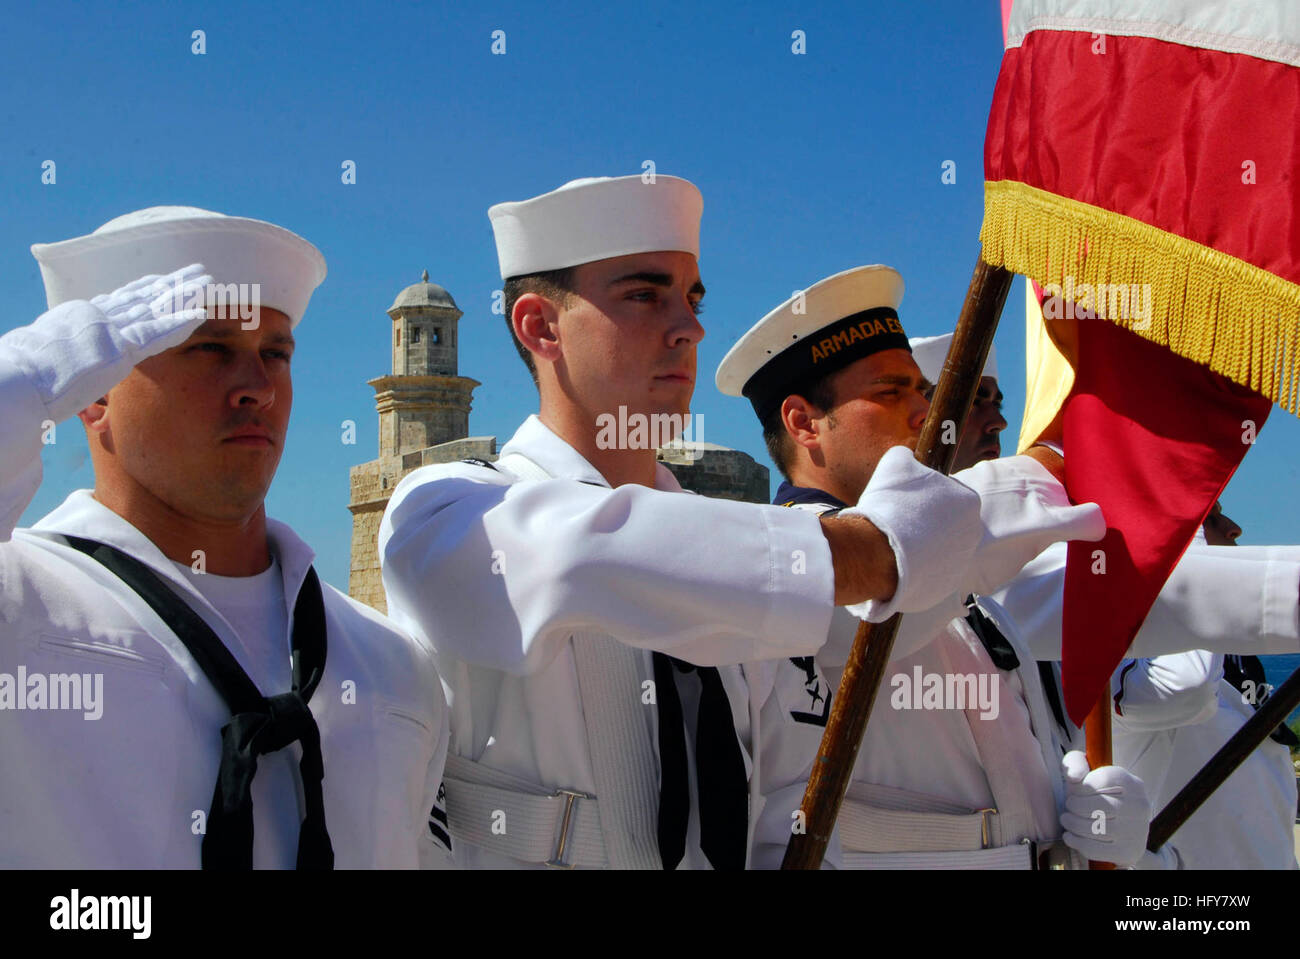 100604-N-7638K-030  MAHON, Spain (June 4, 2010) Fire Controlman 2nd Class Kevin McCarthy, left, from Daytona Beach, Fla., and Yeoman 3rd Class Jeremy Tenney, from Lexington Park, Md., participate in a color guard during the Adm. David Farragut celebration at Port Mahon, Menorca, Spain. Farragut was the U.S. Navy's first admiral. McCarthy and Tenney are both assigned to the guided-missile frigate USS Taylor (FFG 50), which is participating in Operation Active Endeavor providing a safe and secure Mediterranean Sea. (U.S. Navy photo by Mass Communication Specialist 1st Class Edward Kessler/releas Stock Photo